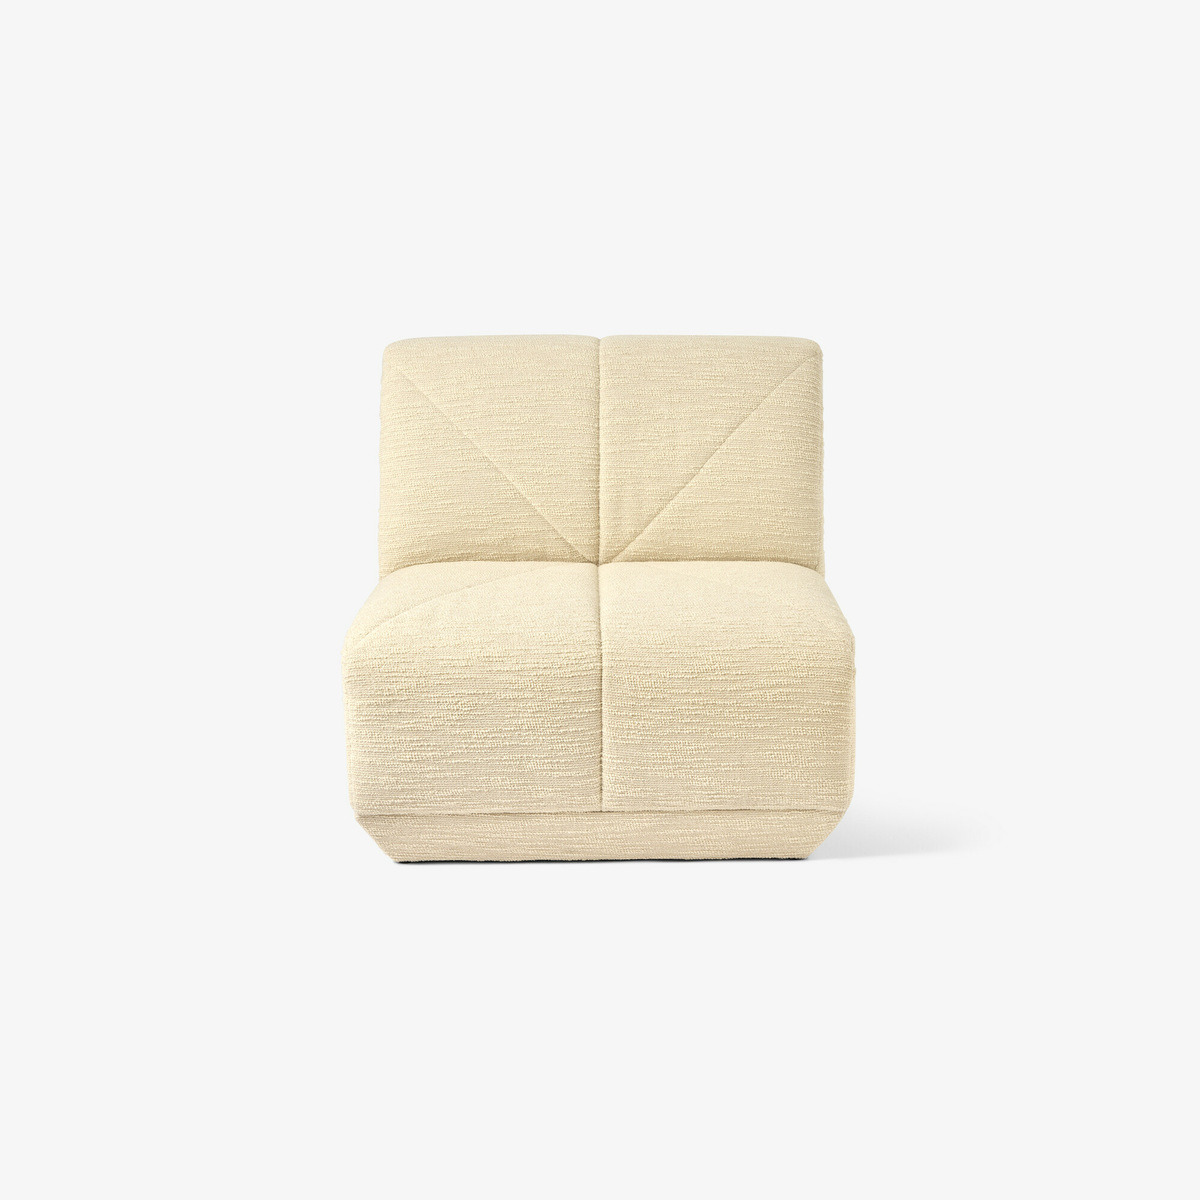 Chill Armchair, Off-White - Curl fabric - image 1